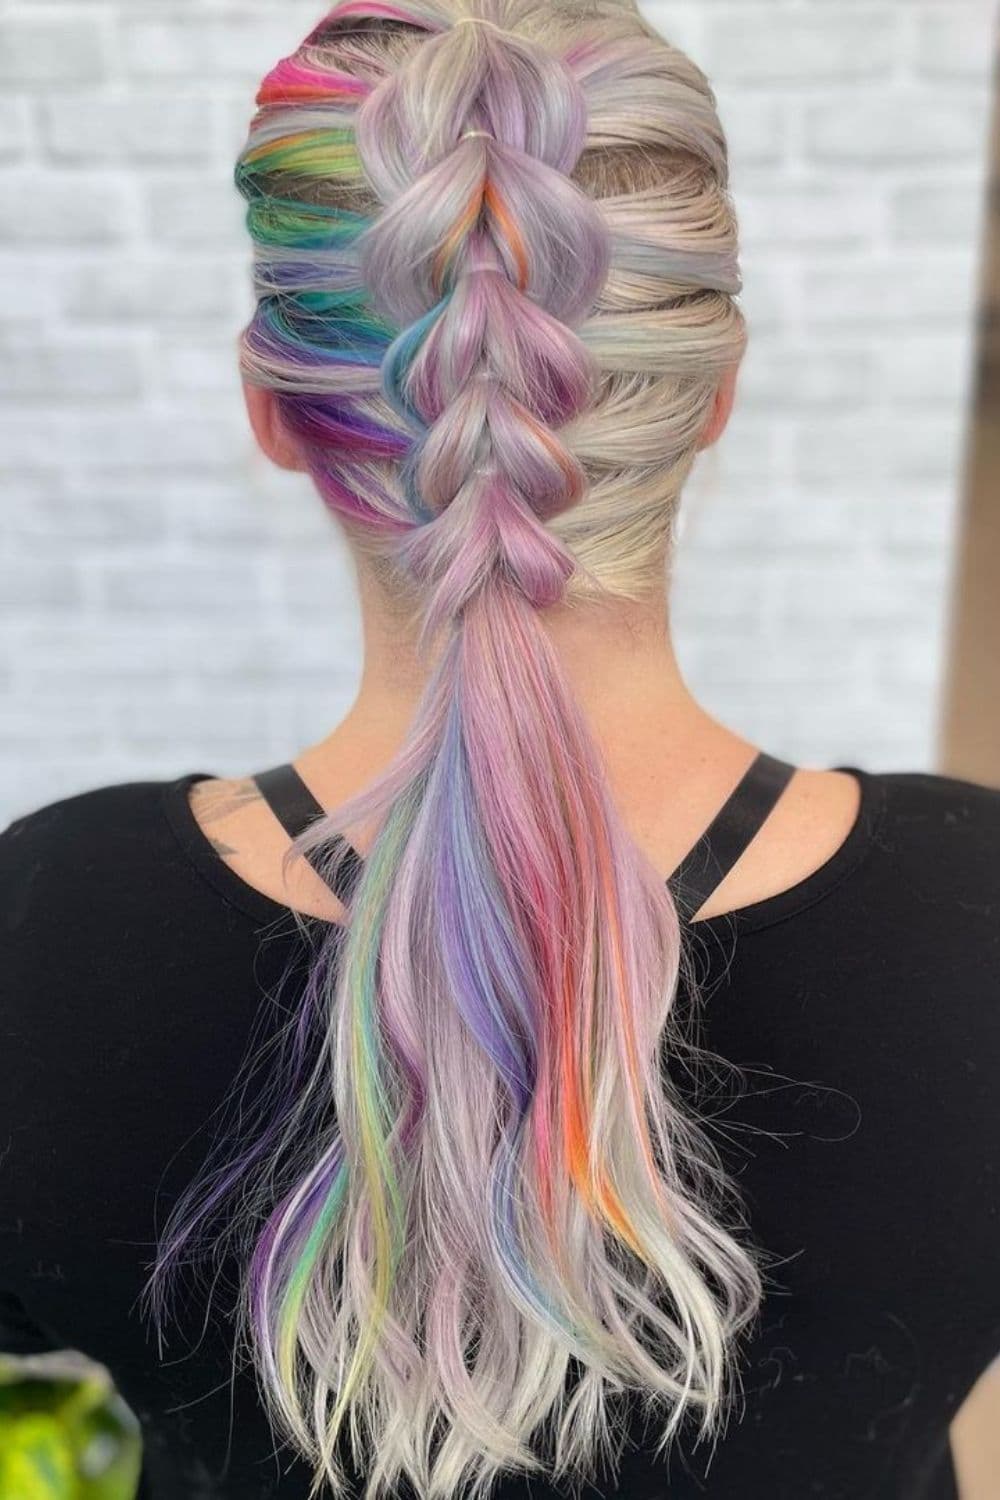 A woman with mixed colors pull-through braids.